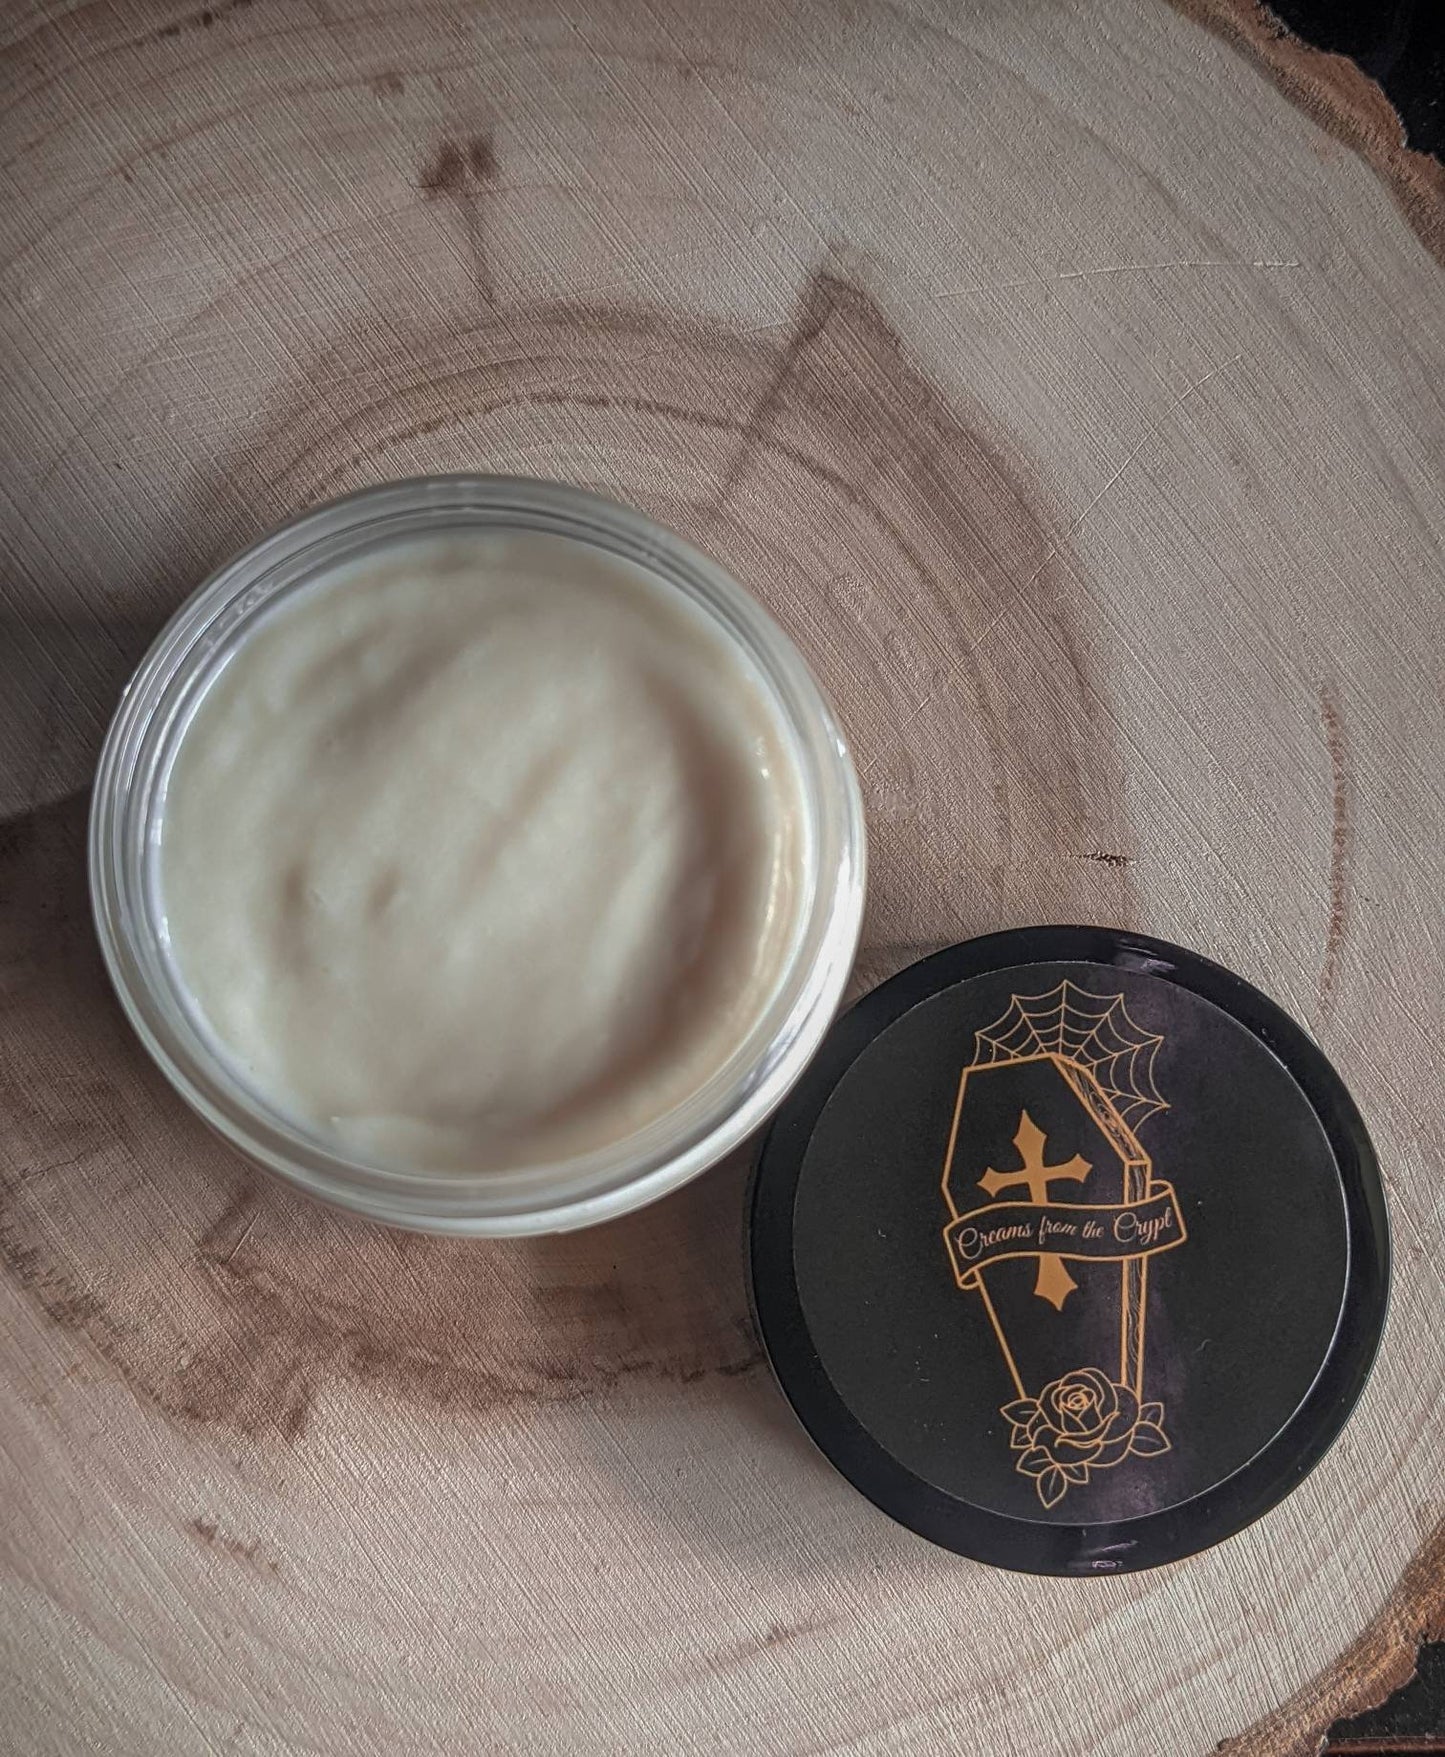 TRICK OR TREAT - Butterscotch Vegan whipped body butter, Shea, mango butter, moisturizer, gothic skincare, sweet scent, fall fragrance